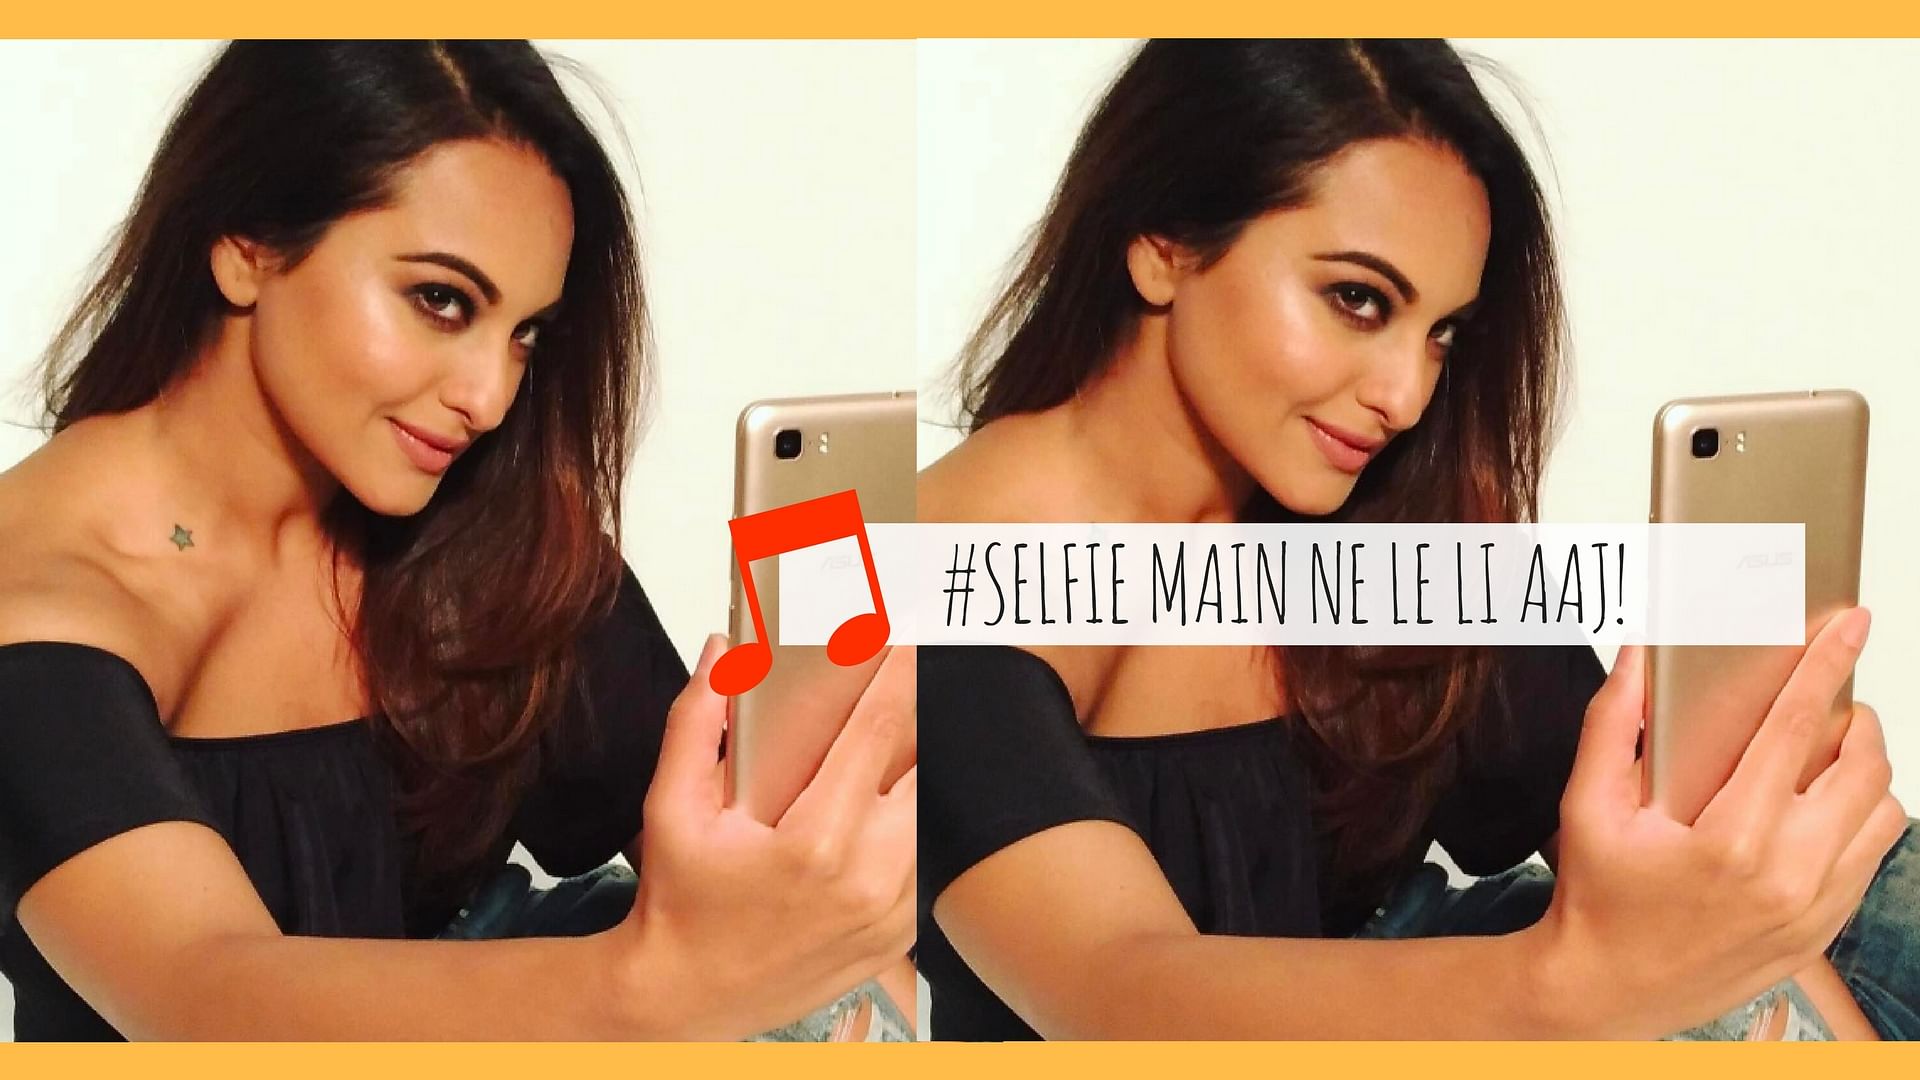 Sonakshi Sinha in selfie mode. (Photo courtesy: Instagram; altered by The Quint)